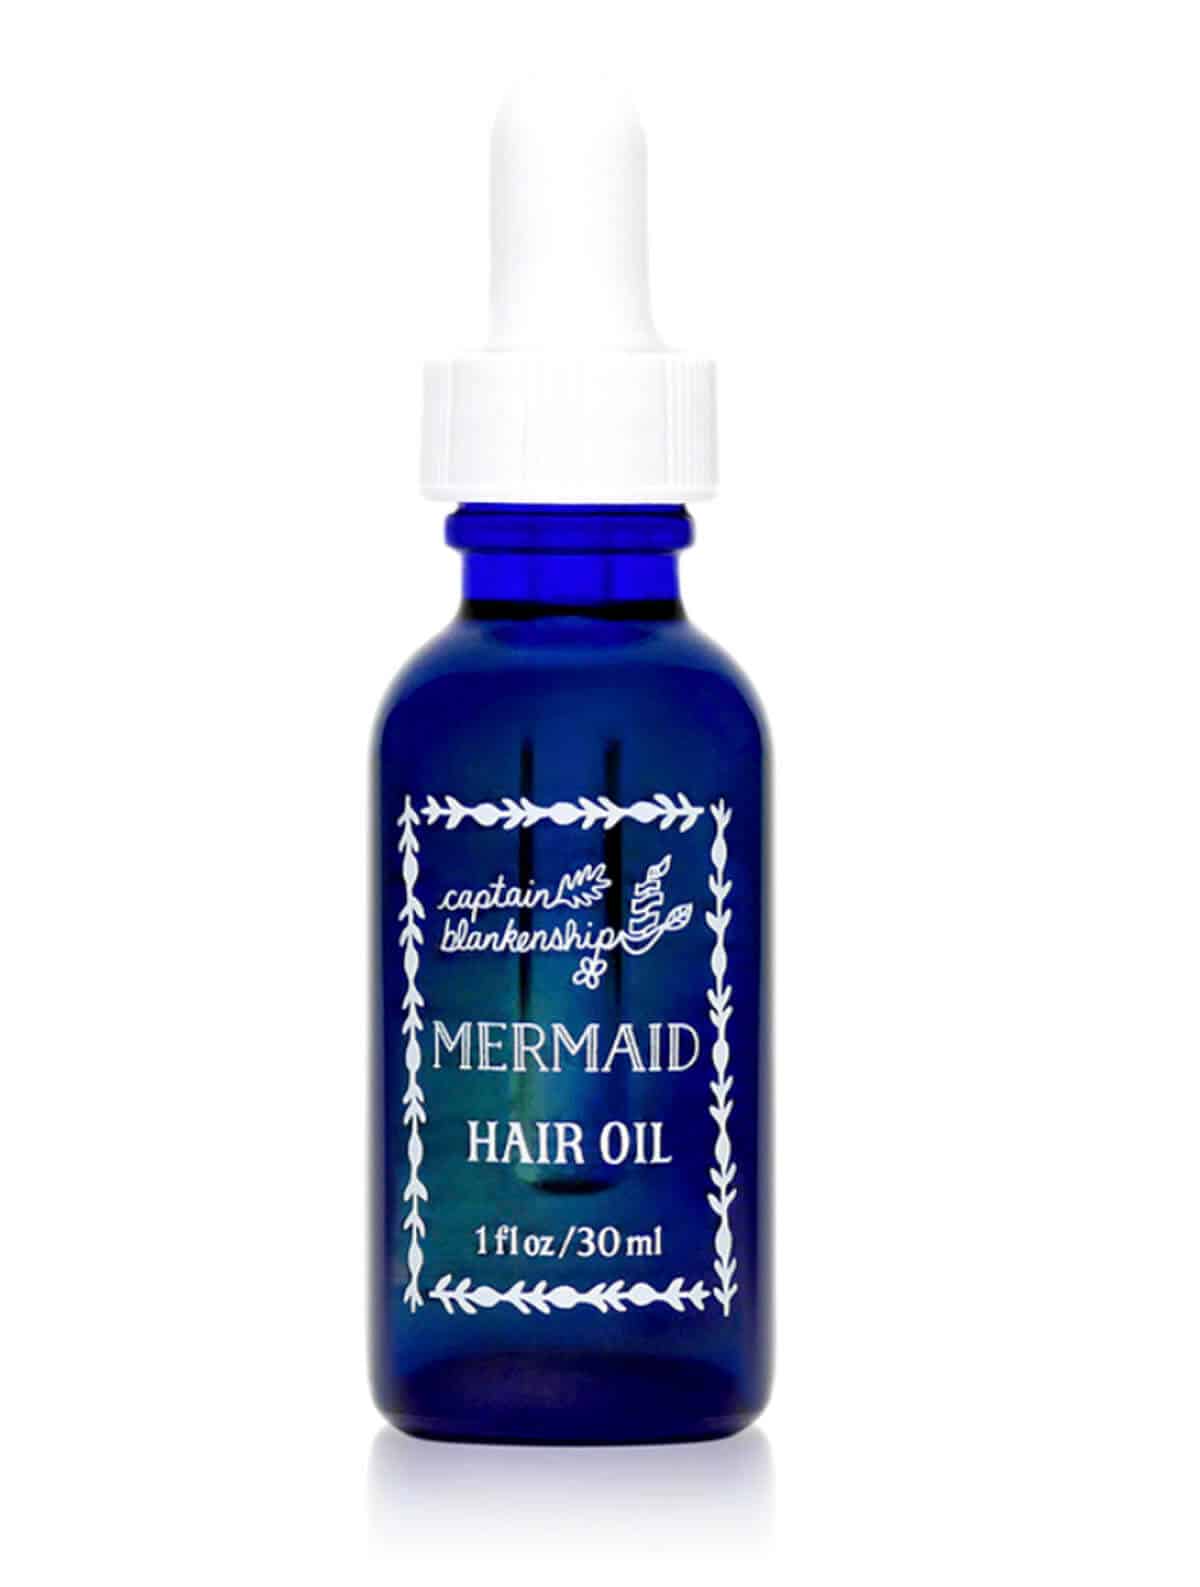 The Best Argan Oil for Your Hair!